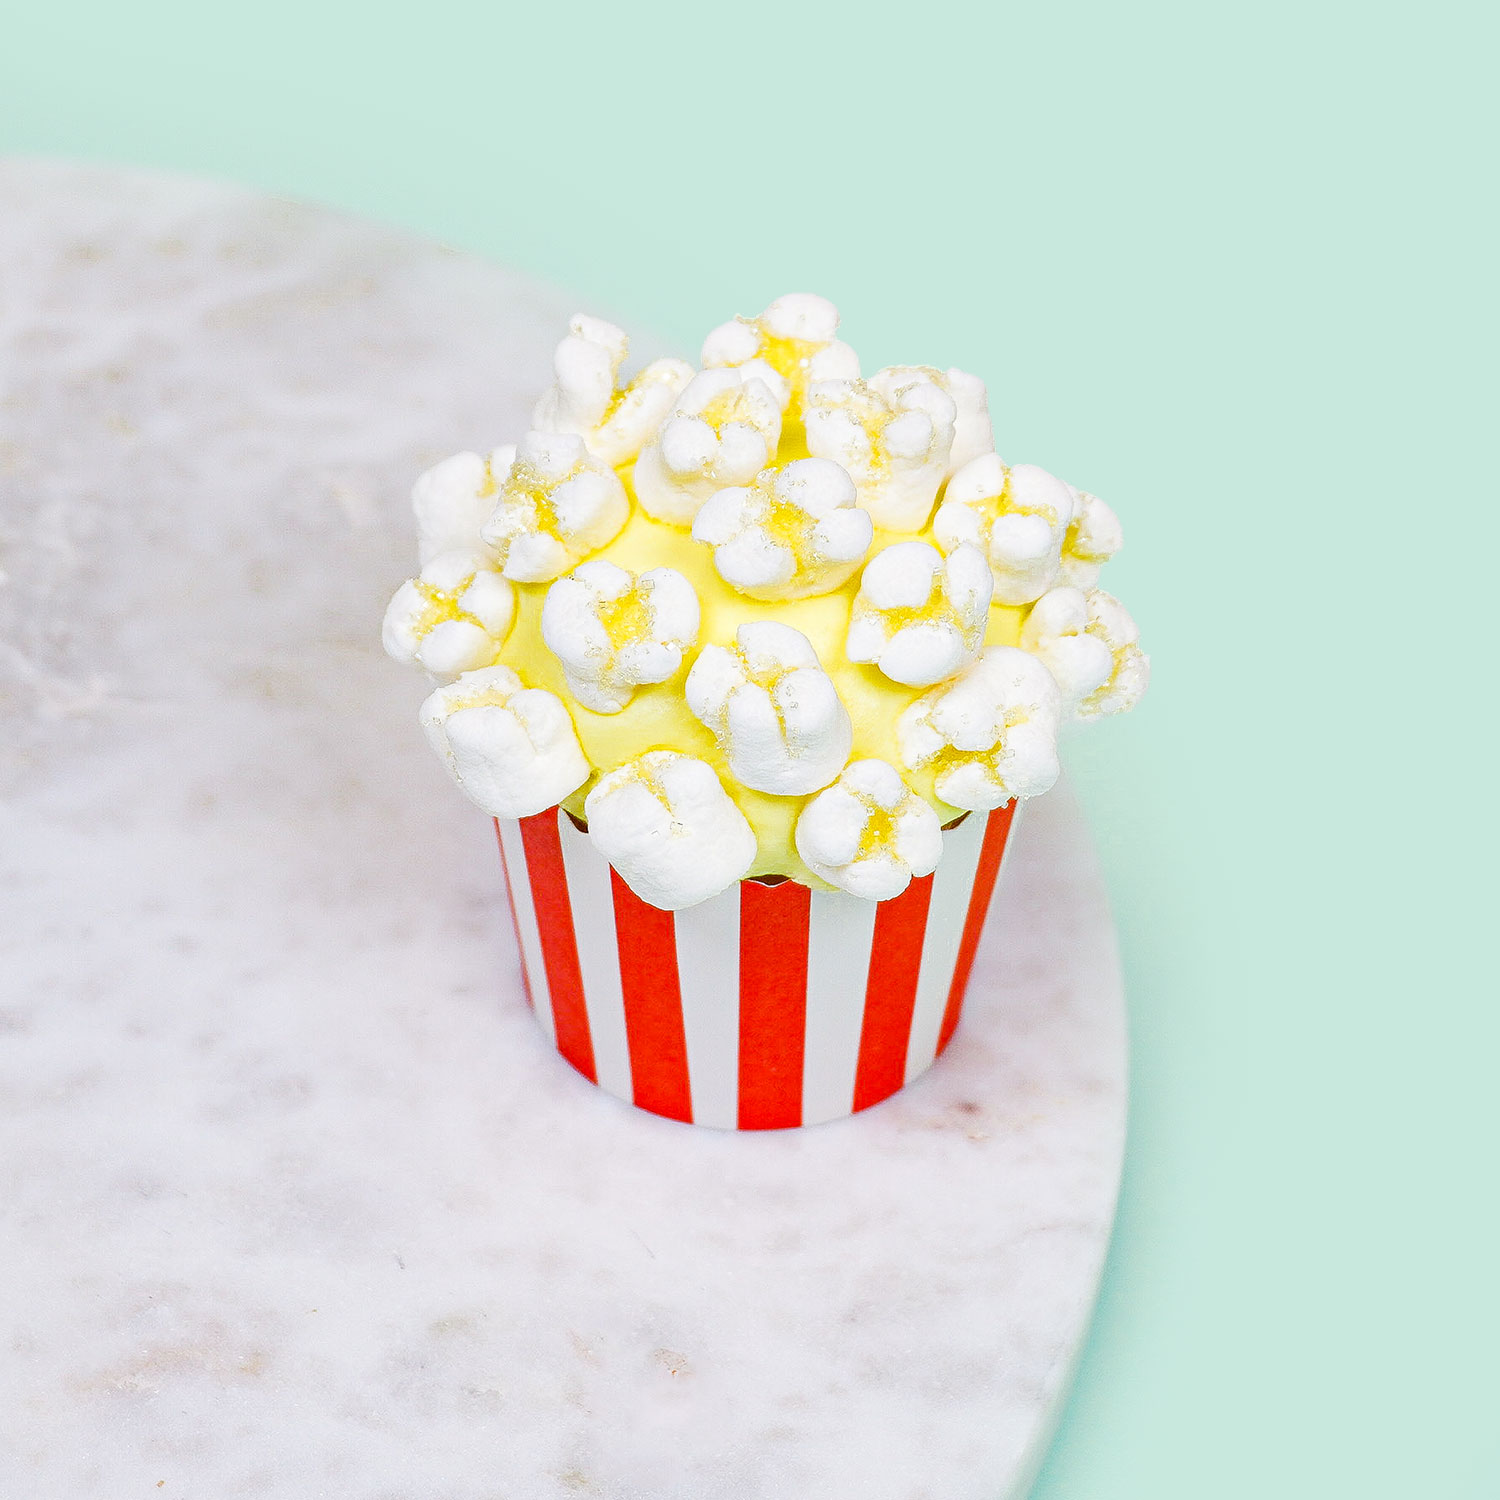 cupcake decorated to look like popcorn